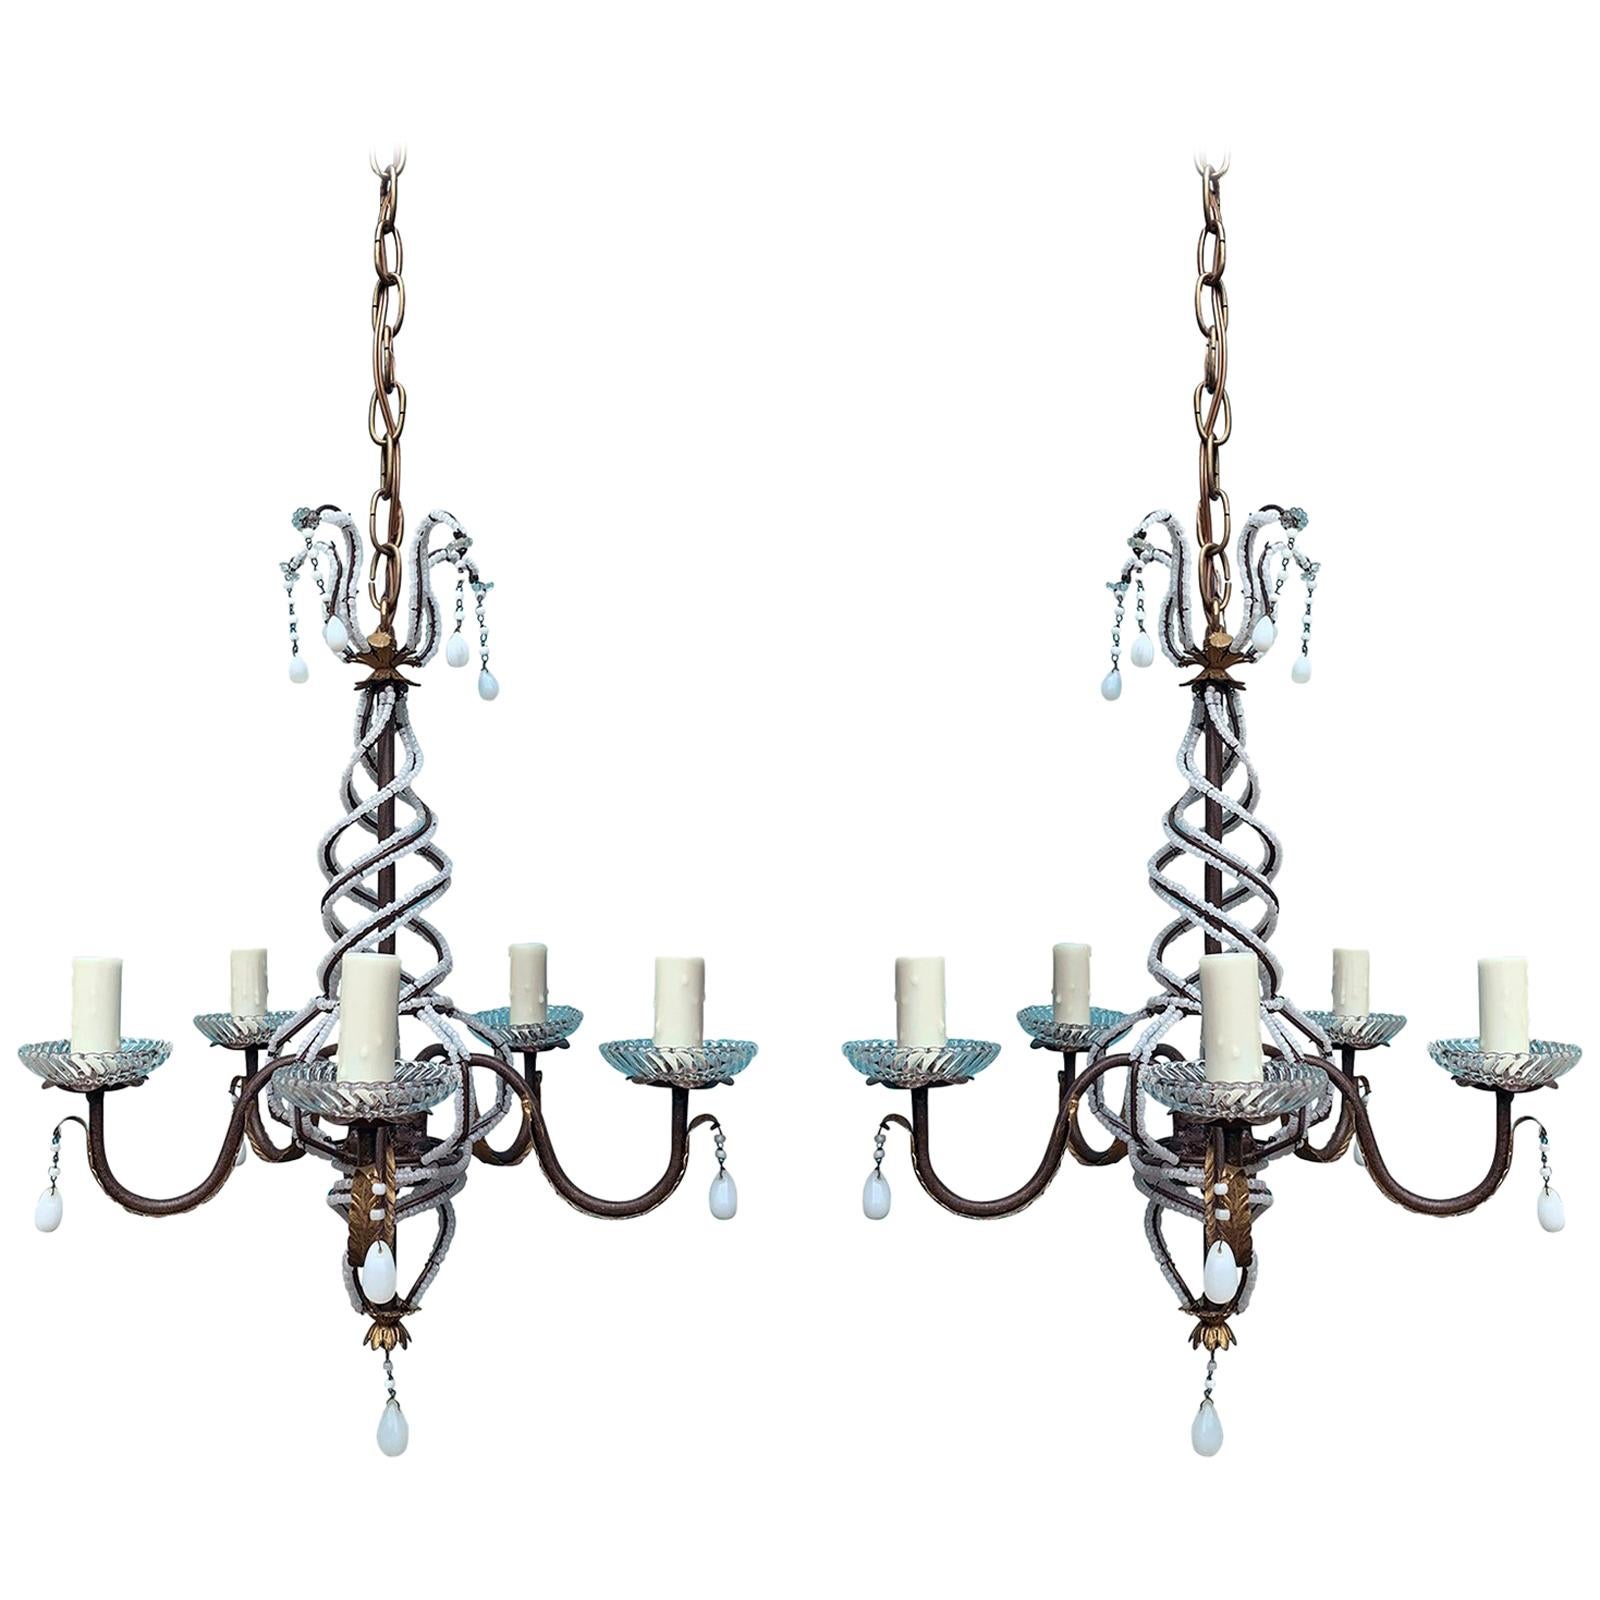 Pair of Mid-20th Century Iron and White Beaded Chandeliers, Gilt Leaf Accents